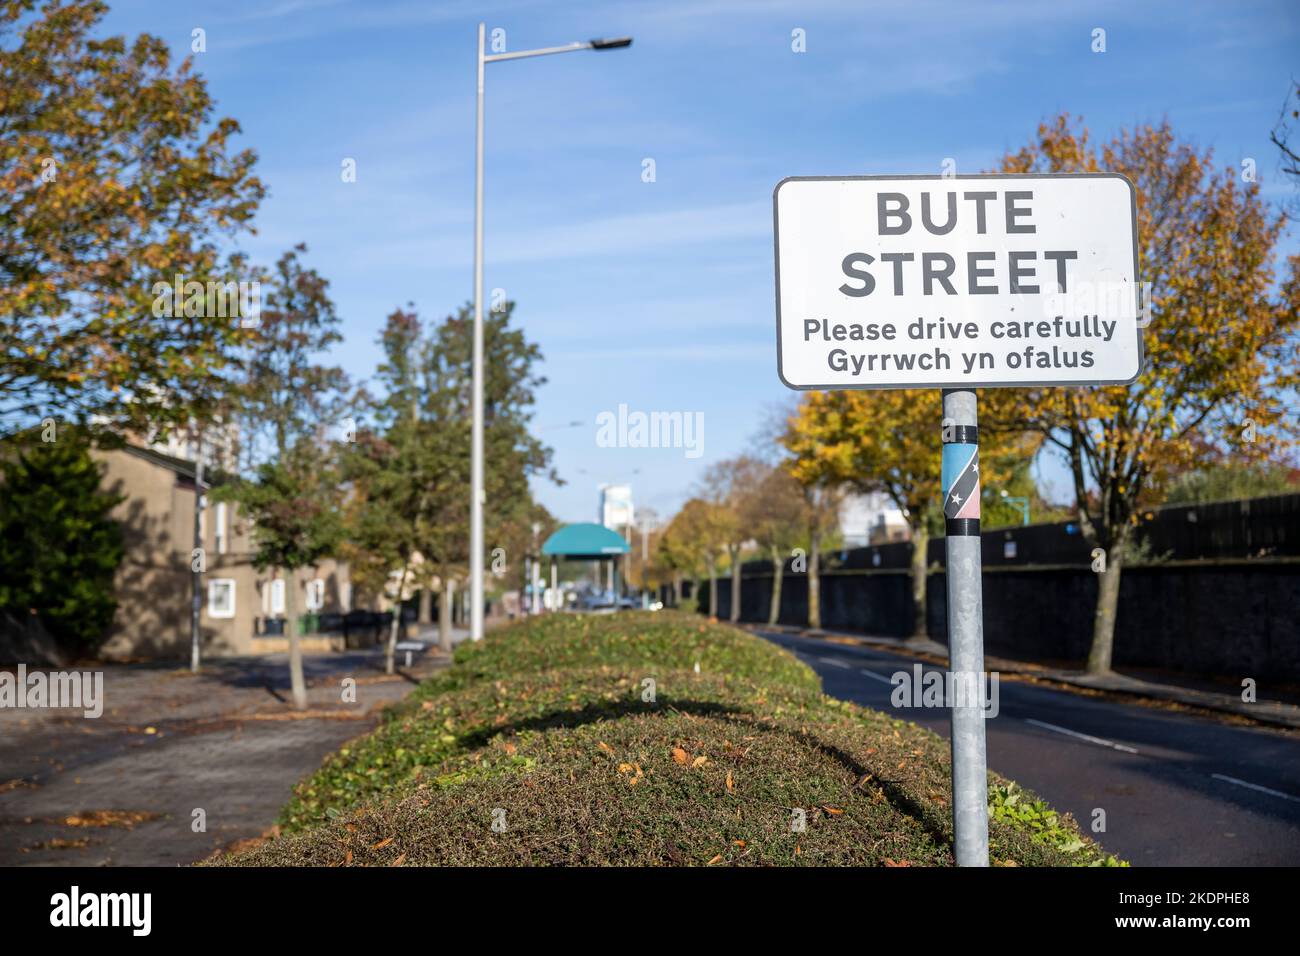 A general view of Bute Street and the Bute Street sign in Cardiff, Wales, United Kingdom. Stock Photo